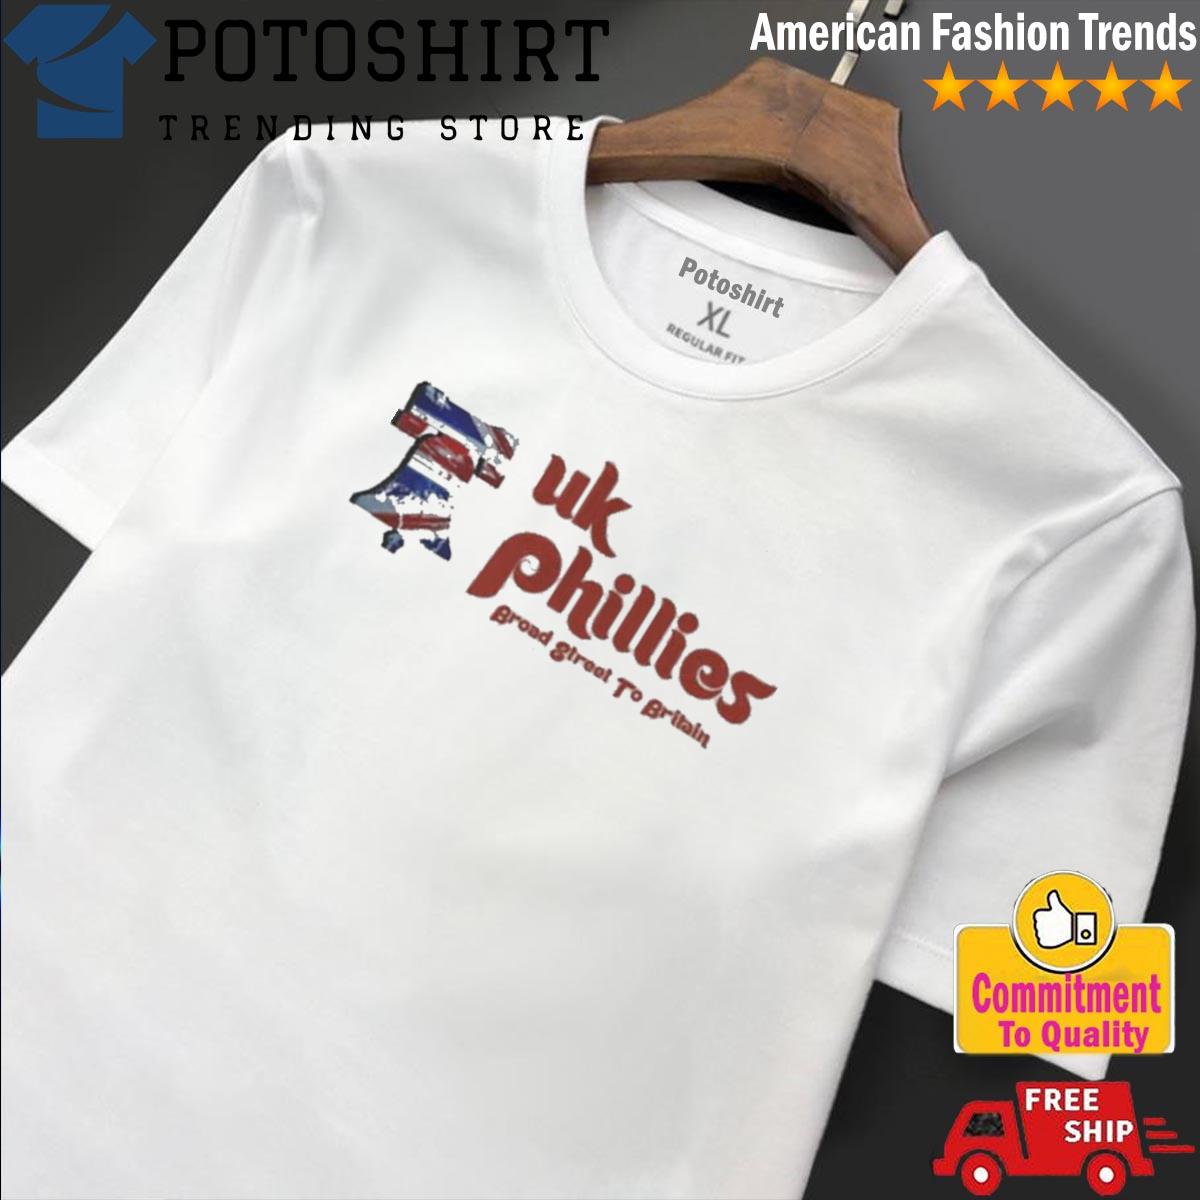 Official uk phillies broad street to britain shirt